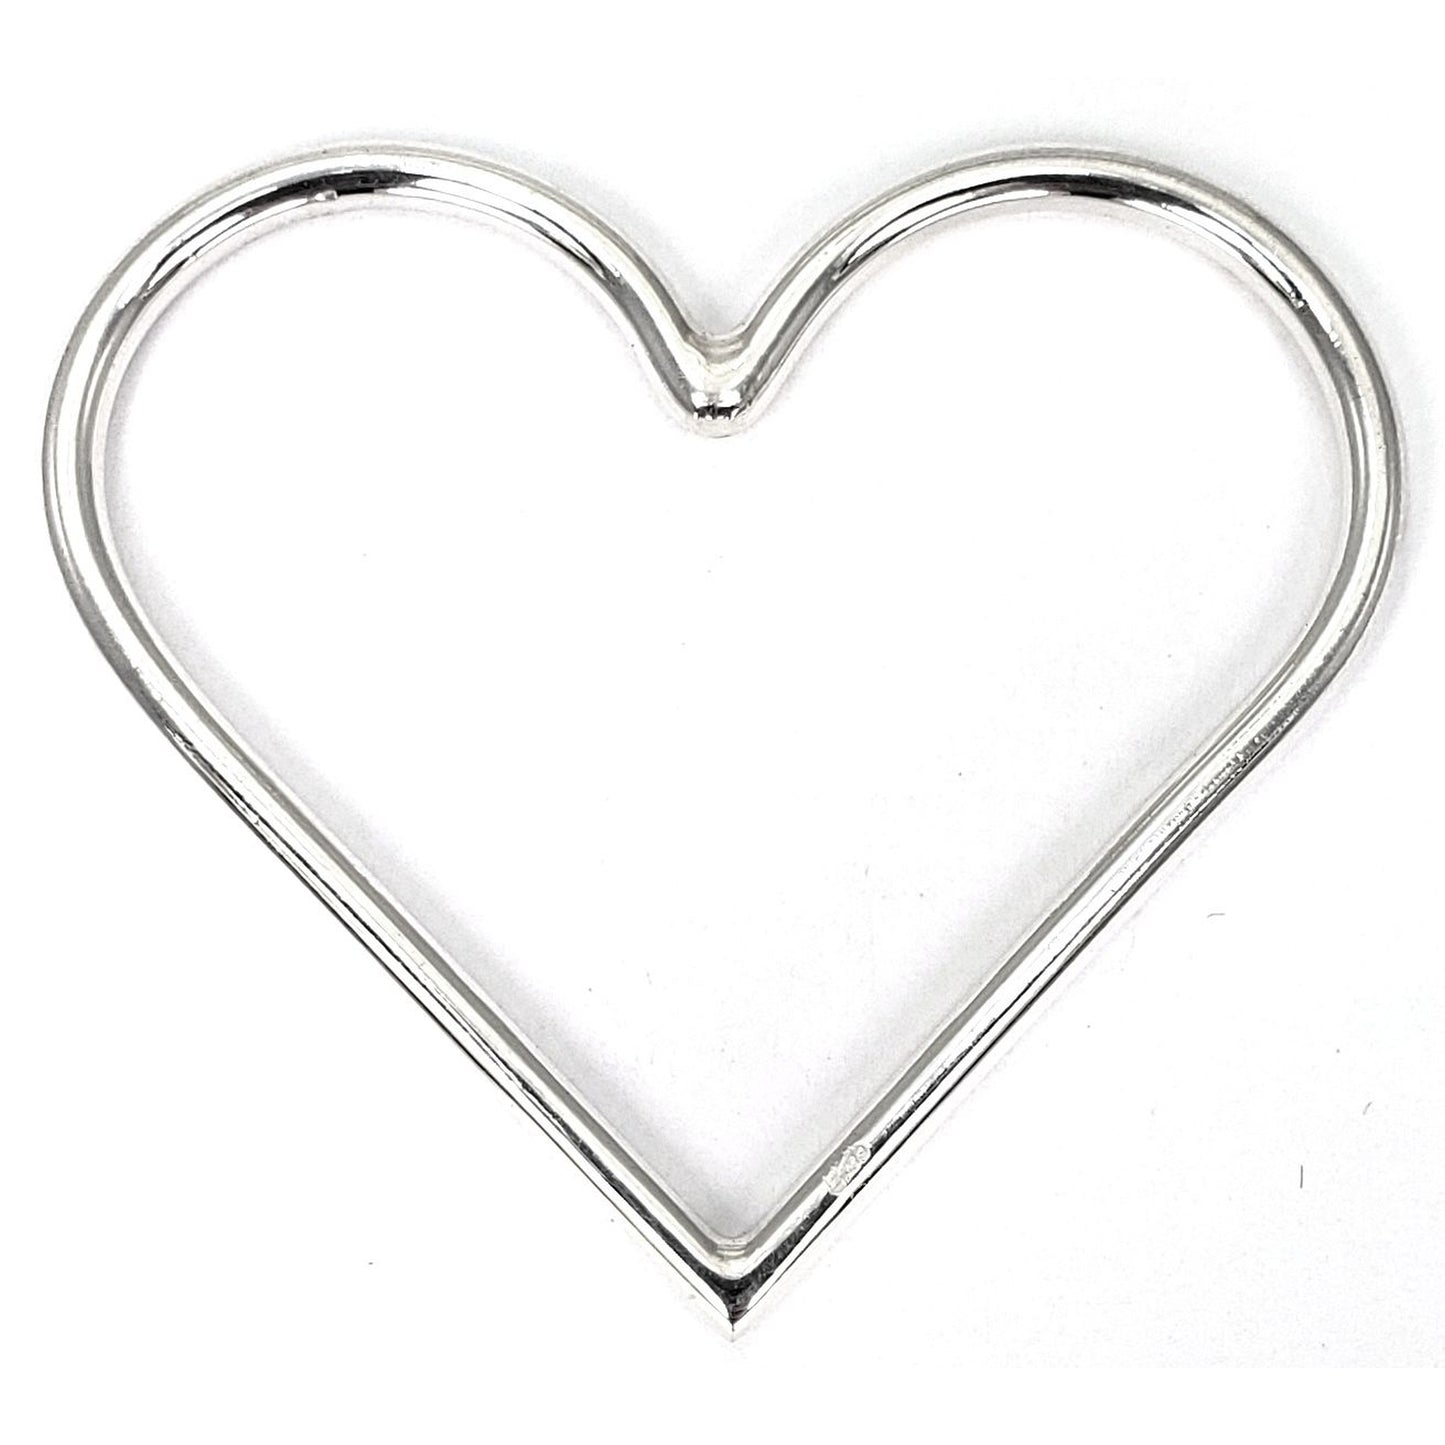 P790 SURA .925 Sterling Silver Heart Pendant from Bali